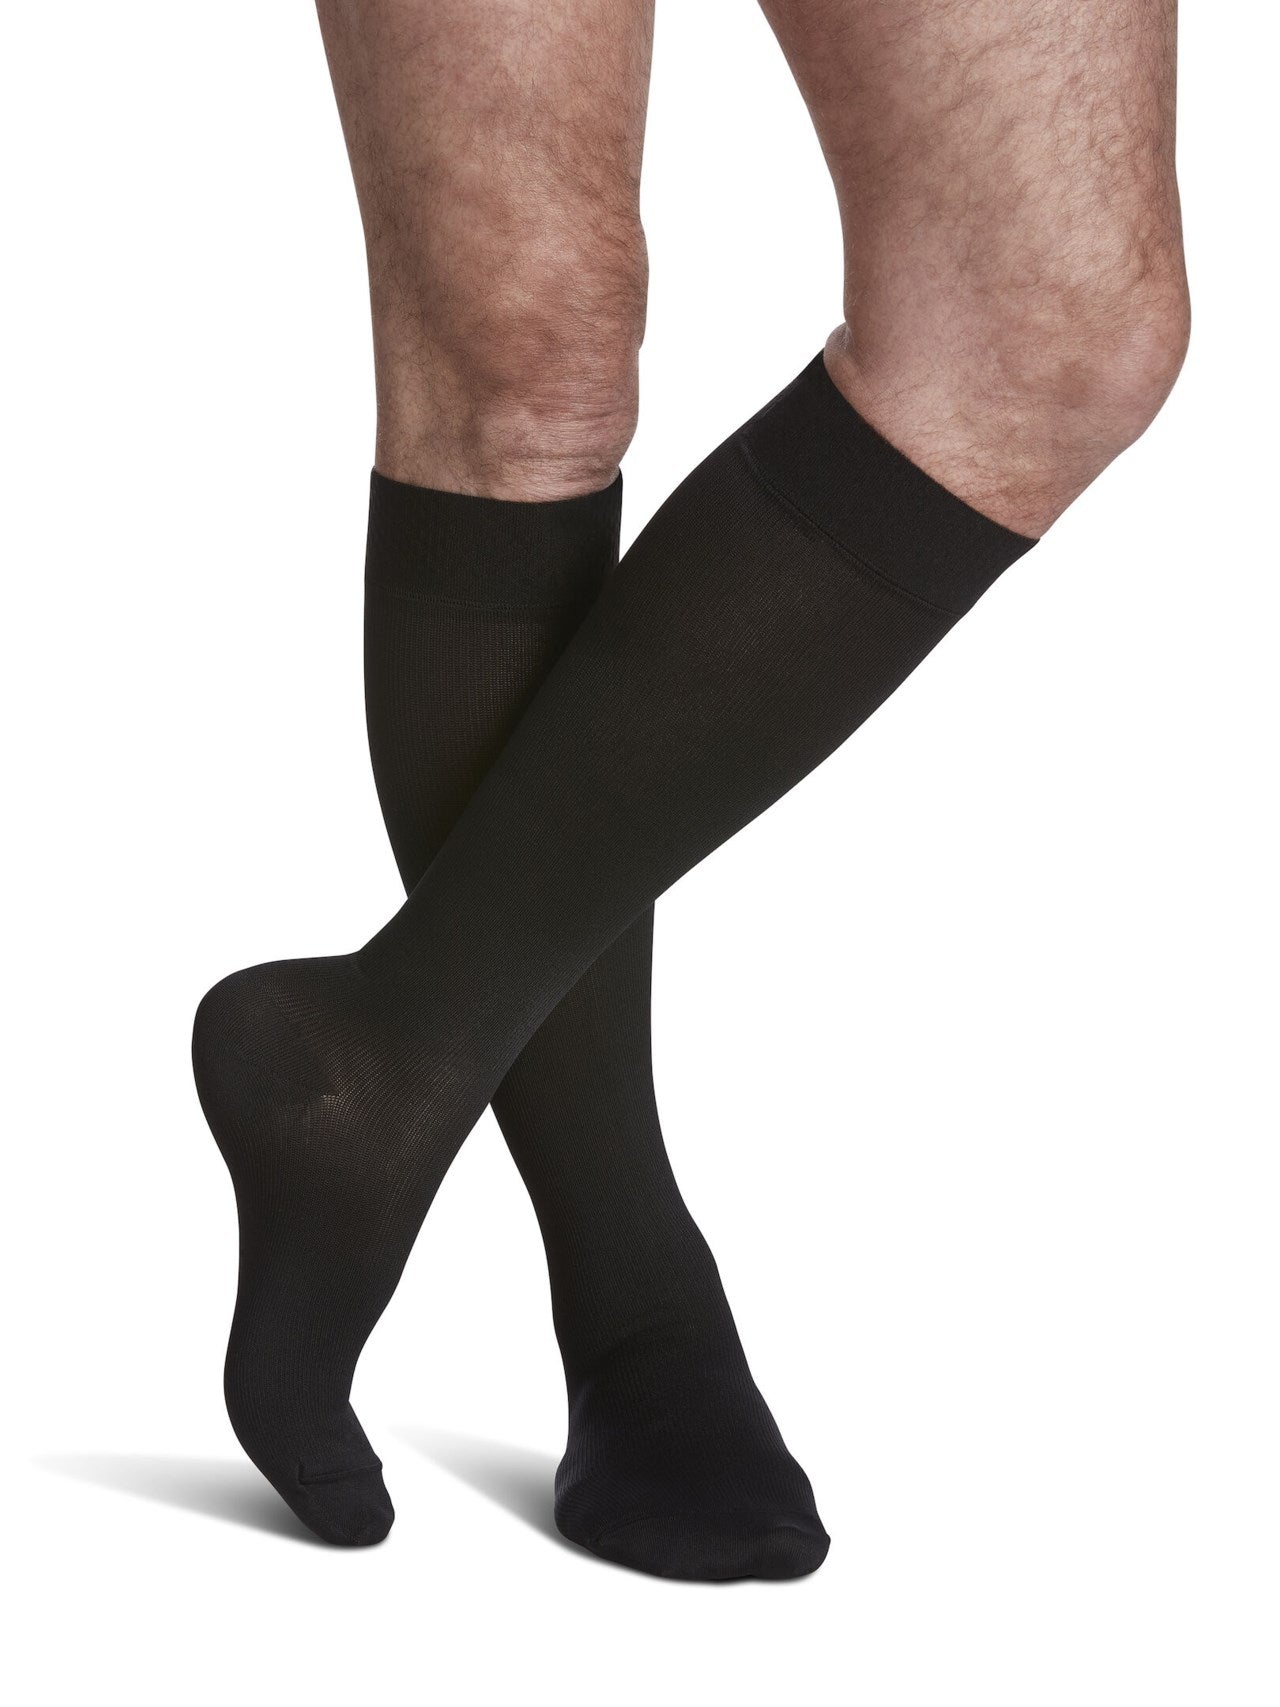 Sigvaris 820 Microfiber Compression Socks 20-30 mmHg Calf High With Grip Top for Men Closed Toe